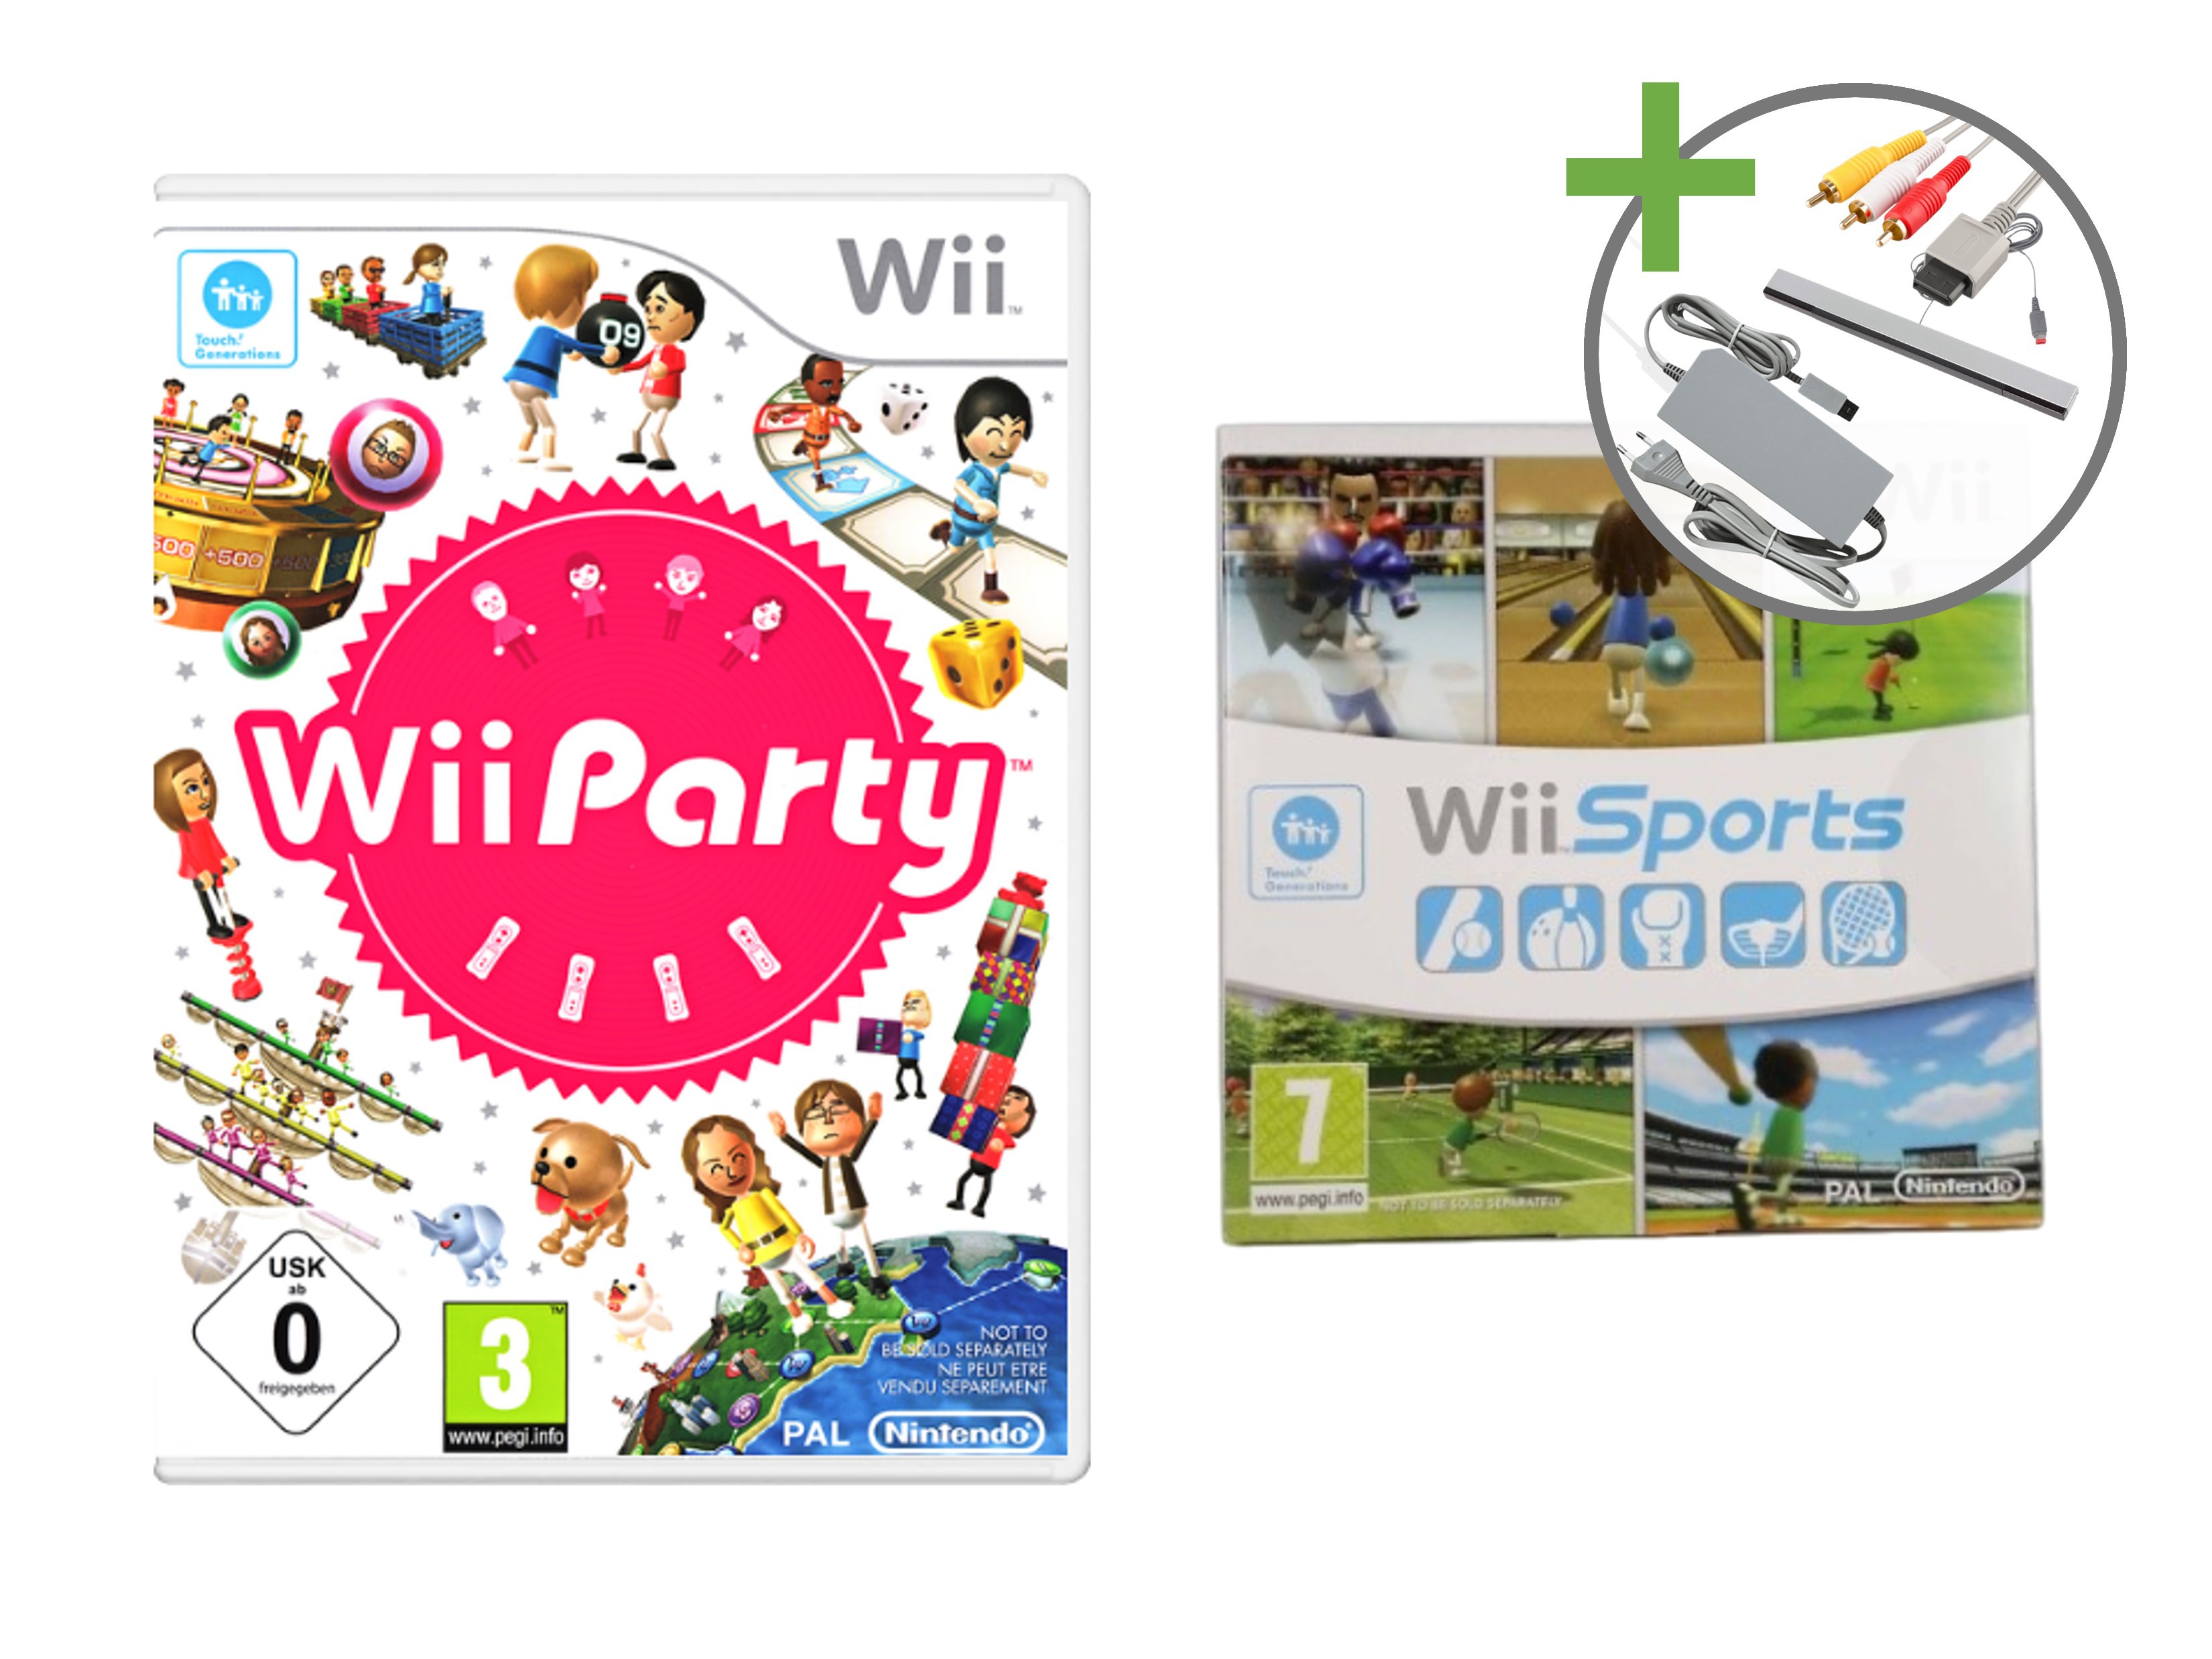 Nintendo Wii Starter Pack - Wii Family Edition [Complete] - Wii Hardware - 5